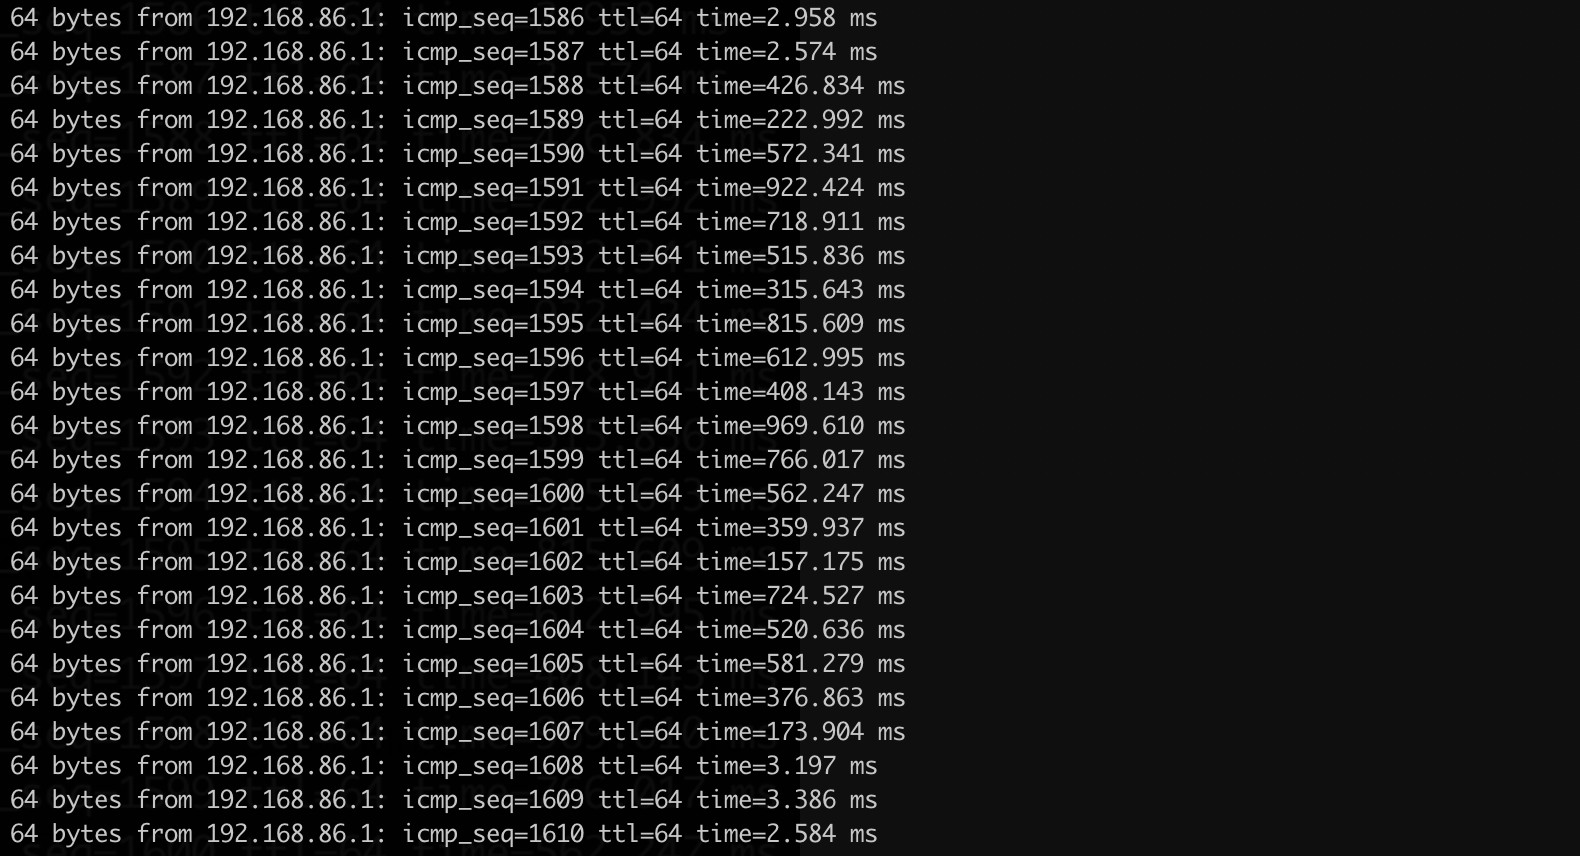 Location Service Latency Spikes - MacOS Wifi Latency Spikes Due to Location Service